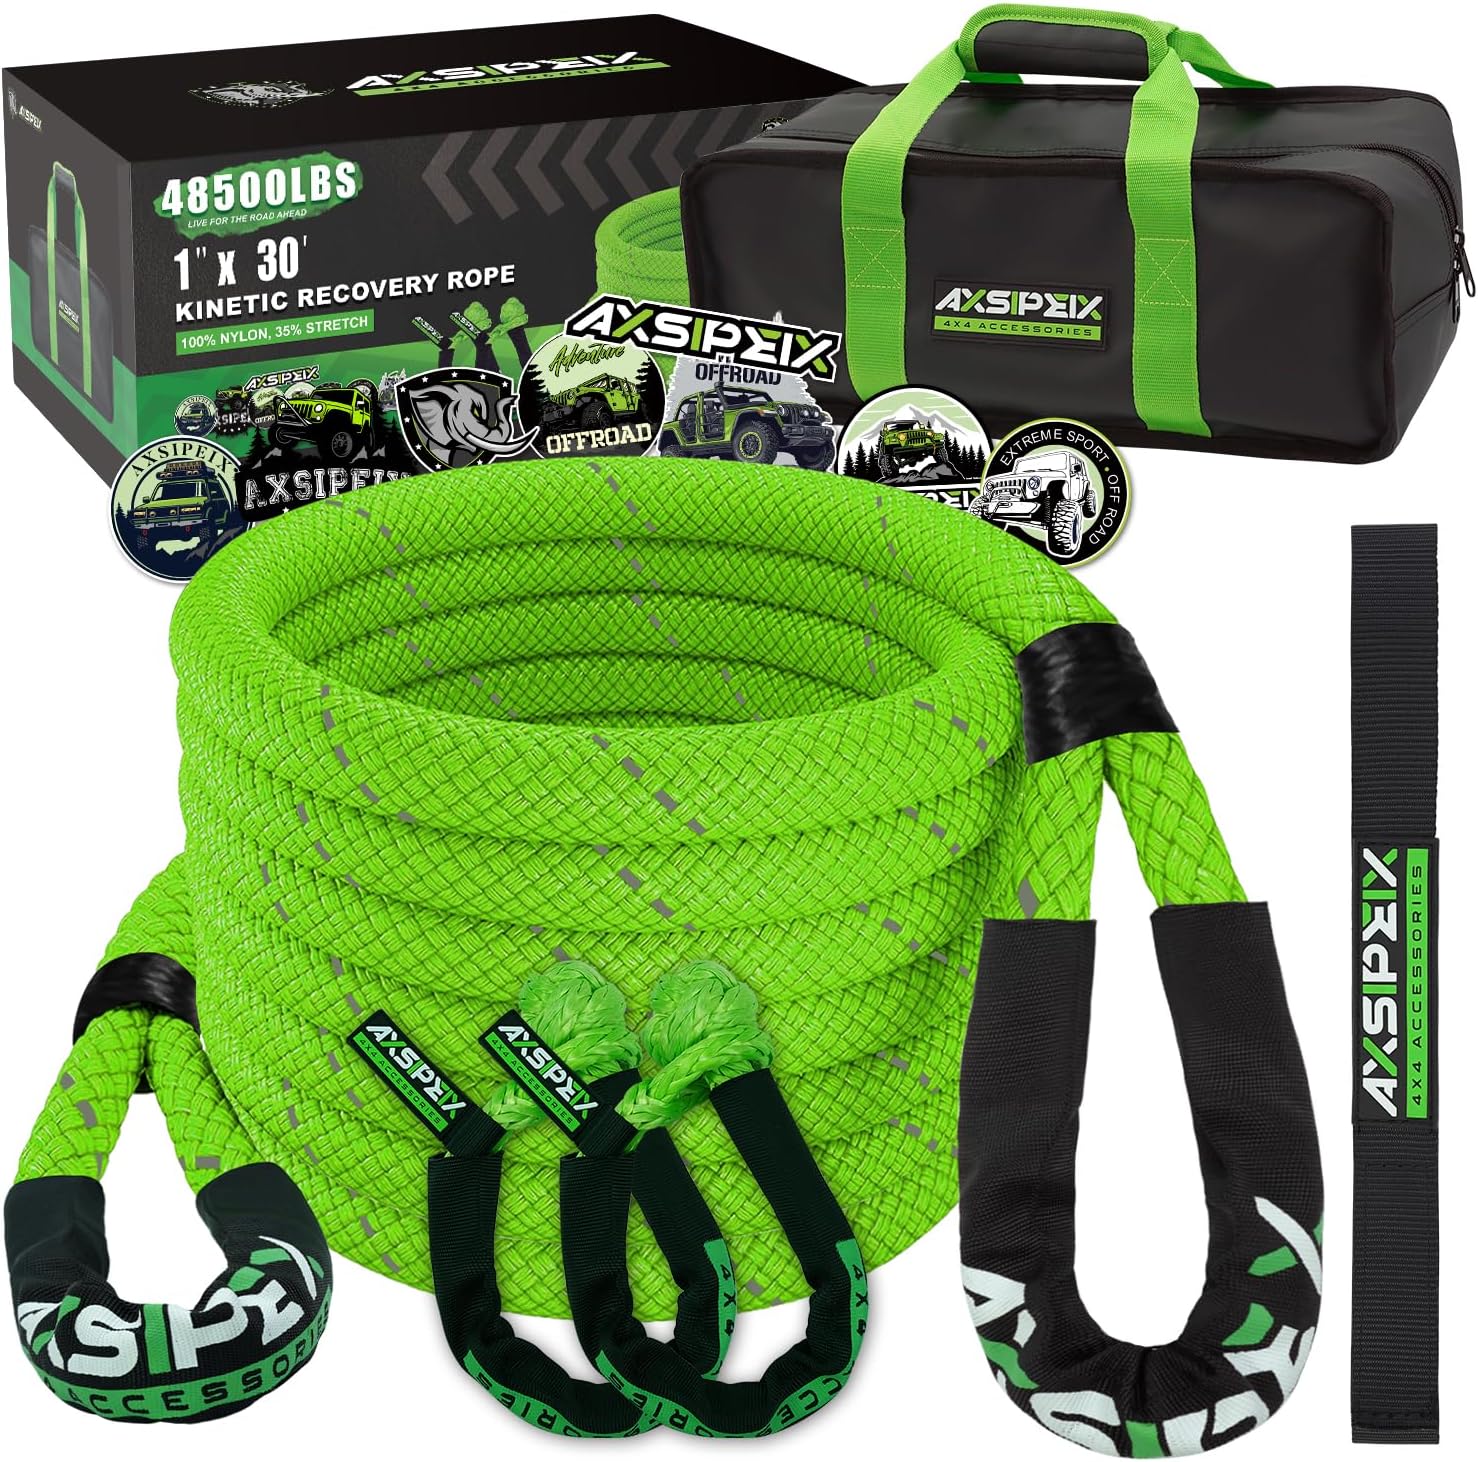  X XBEN 1 x 30' Kinetic Recovery & Tow Rope (32,000lbs